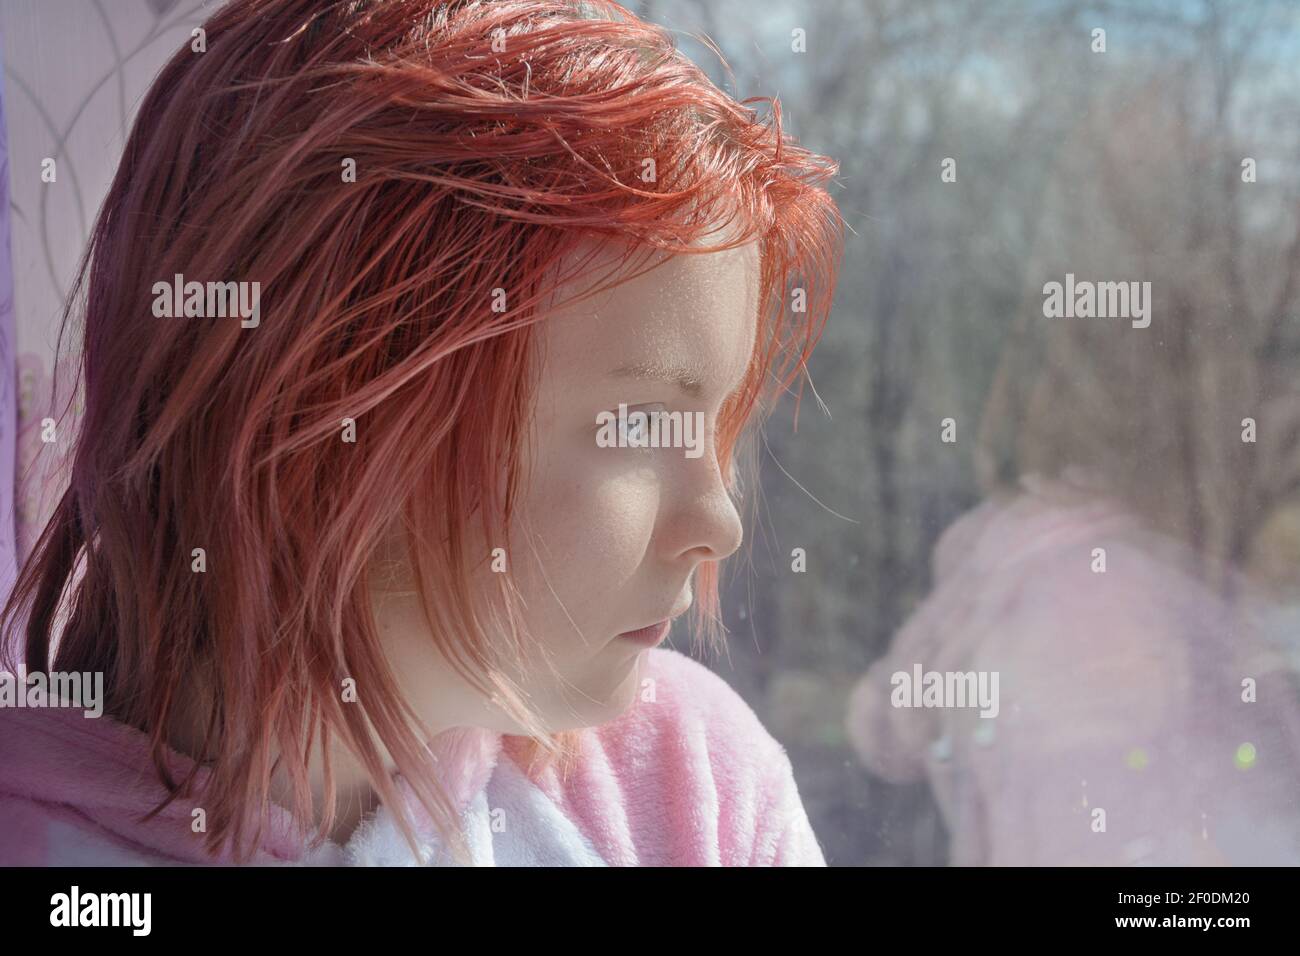 Teenage girl with red hair looks out window to street. Sad emotions on face. Close-up, selective focus. Stock Photo